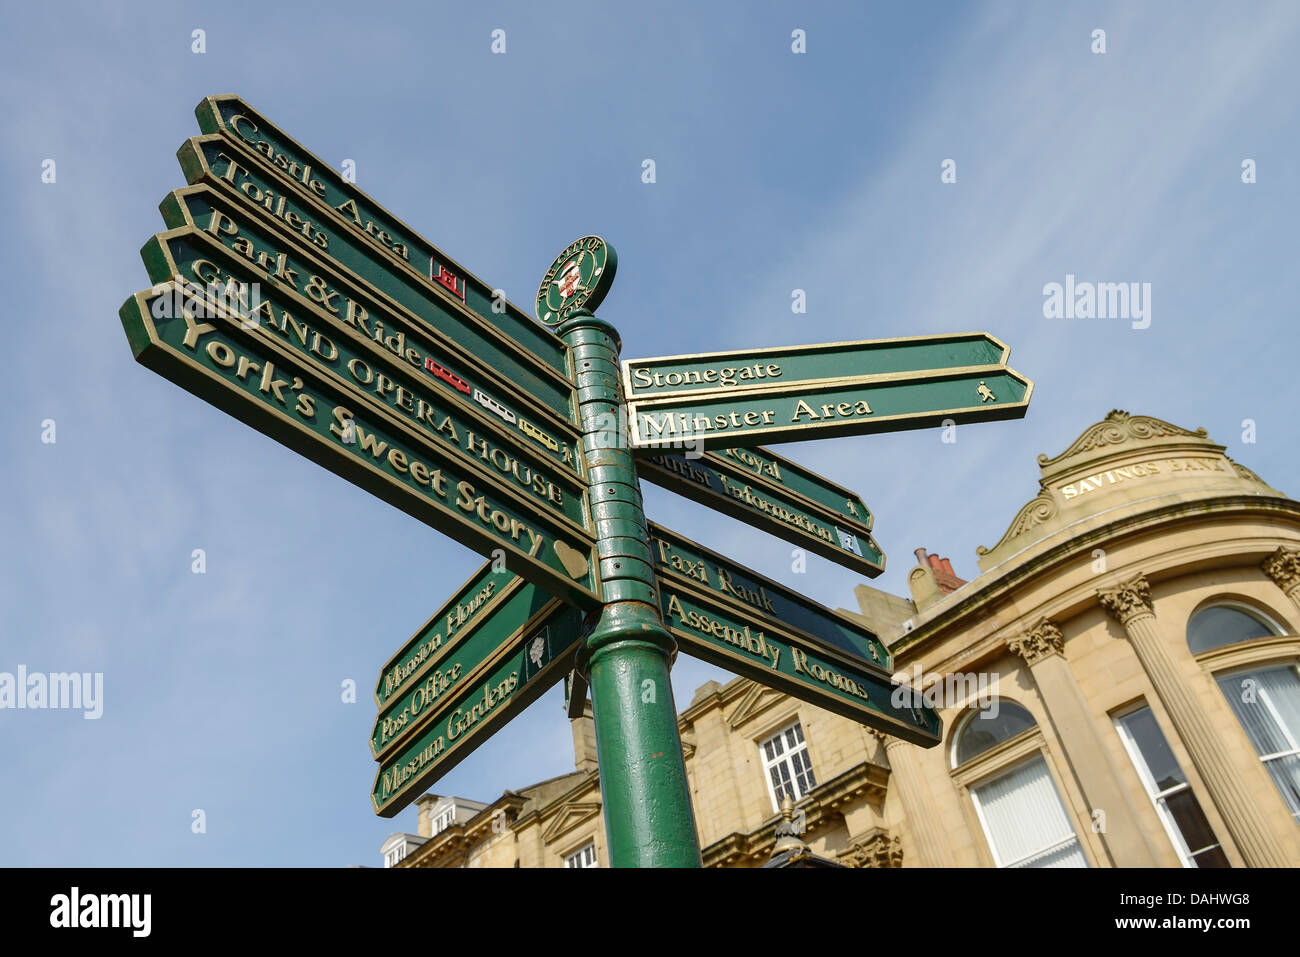 A tourist sign in the city centre of York directing to a range of tourist attractions Stock Photo